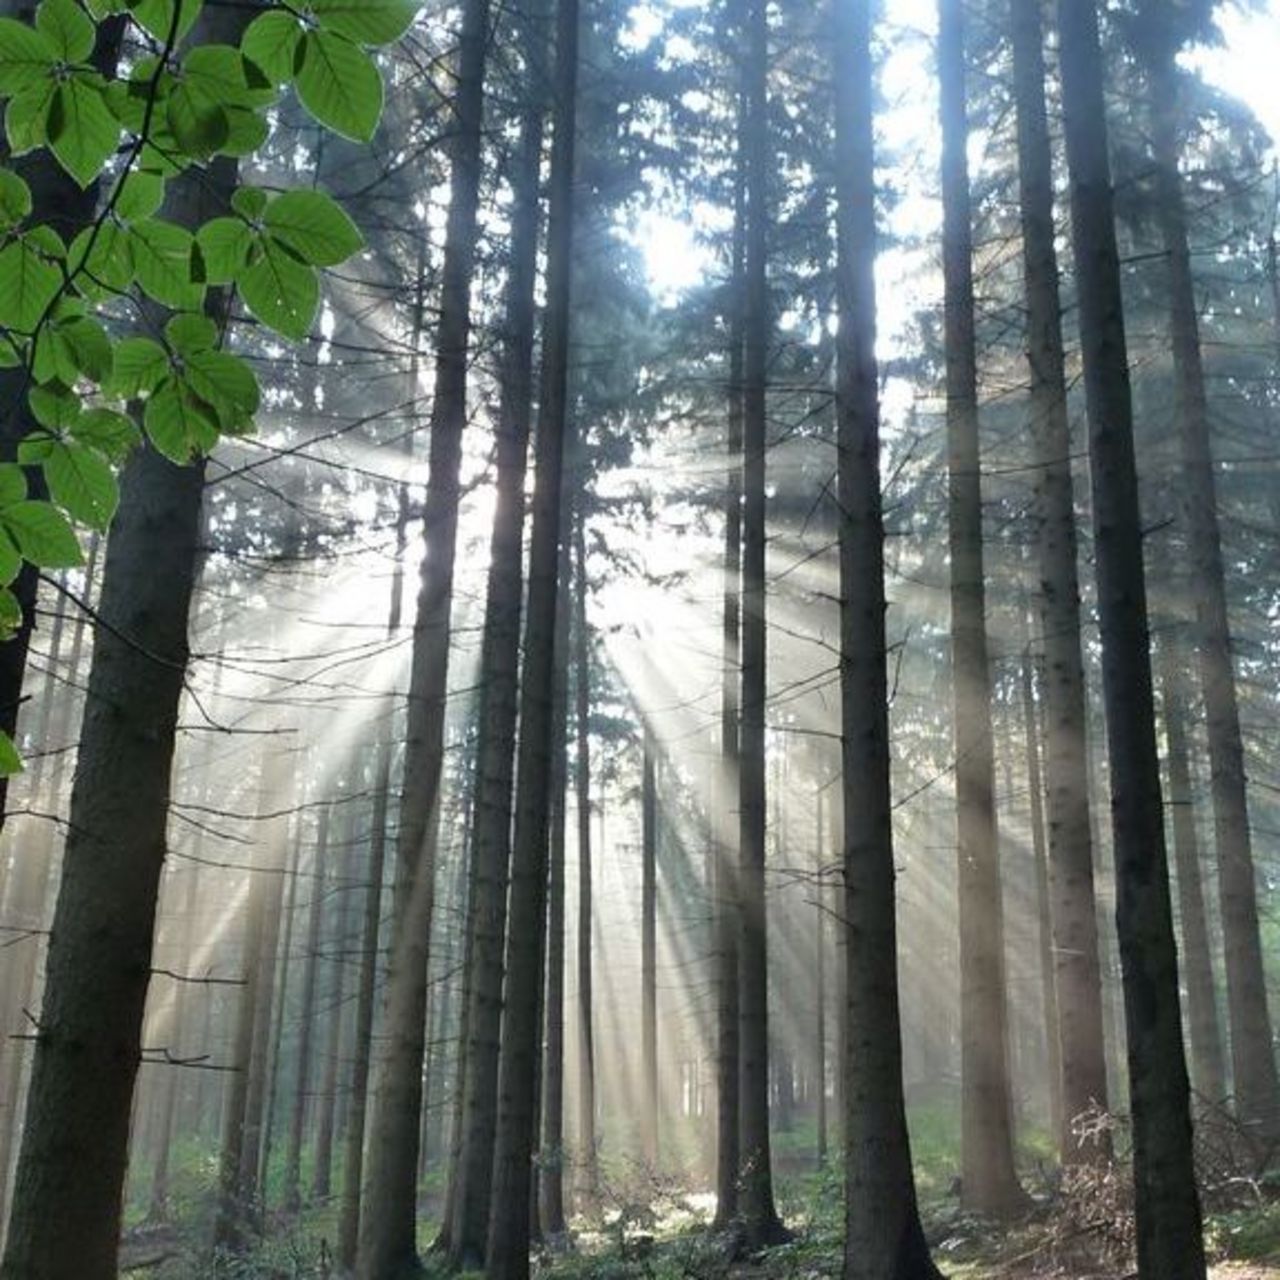 Rays of sunlight falling through a stand of spruce trees